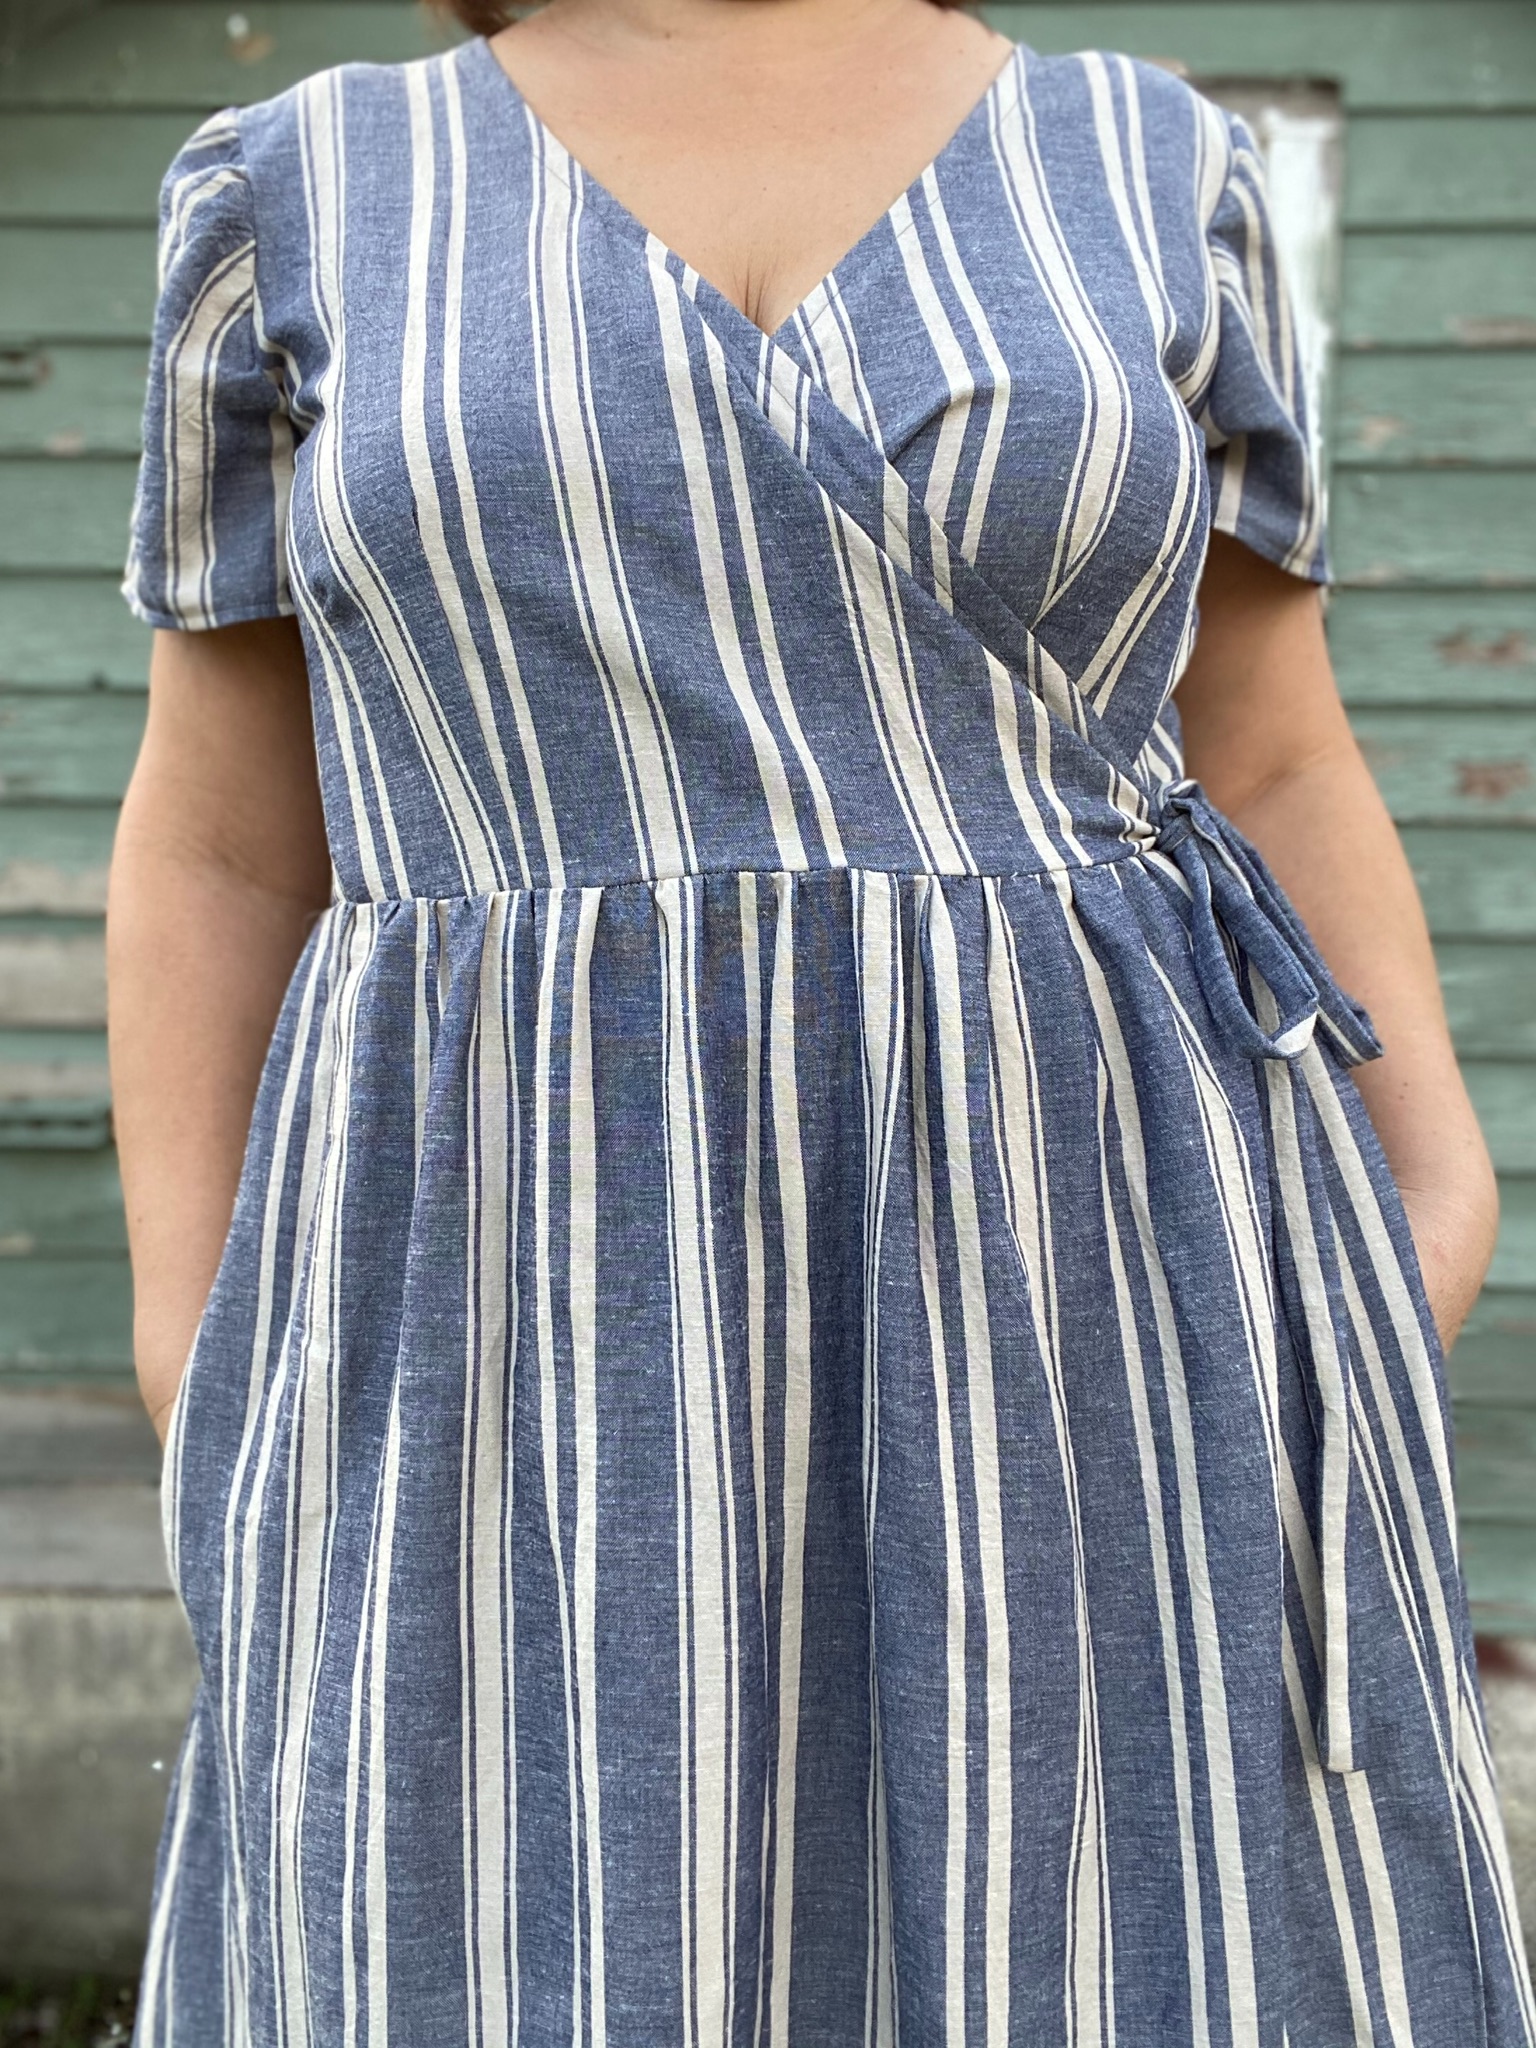 By Hand London Hannah Dress Review